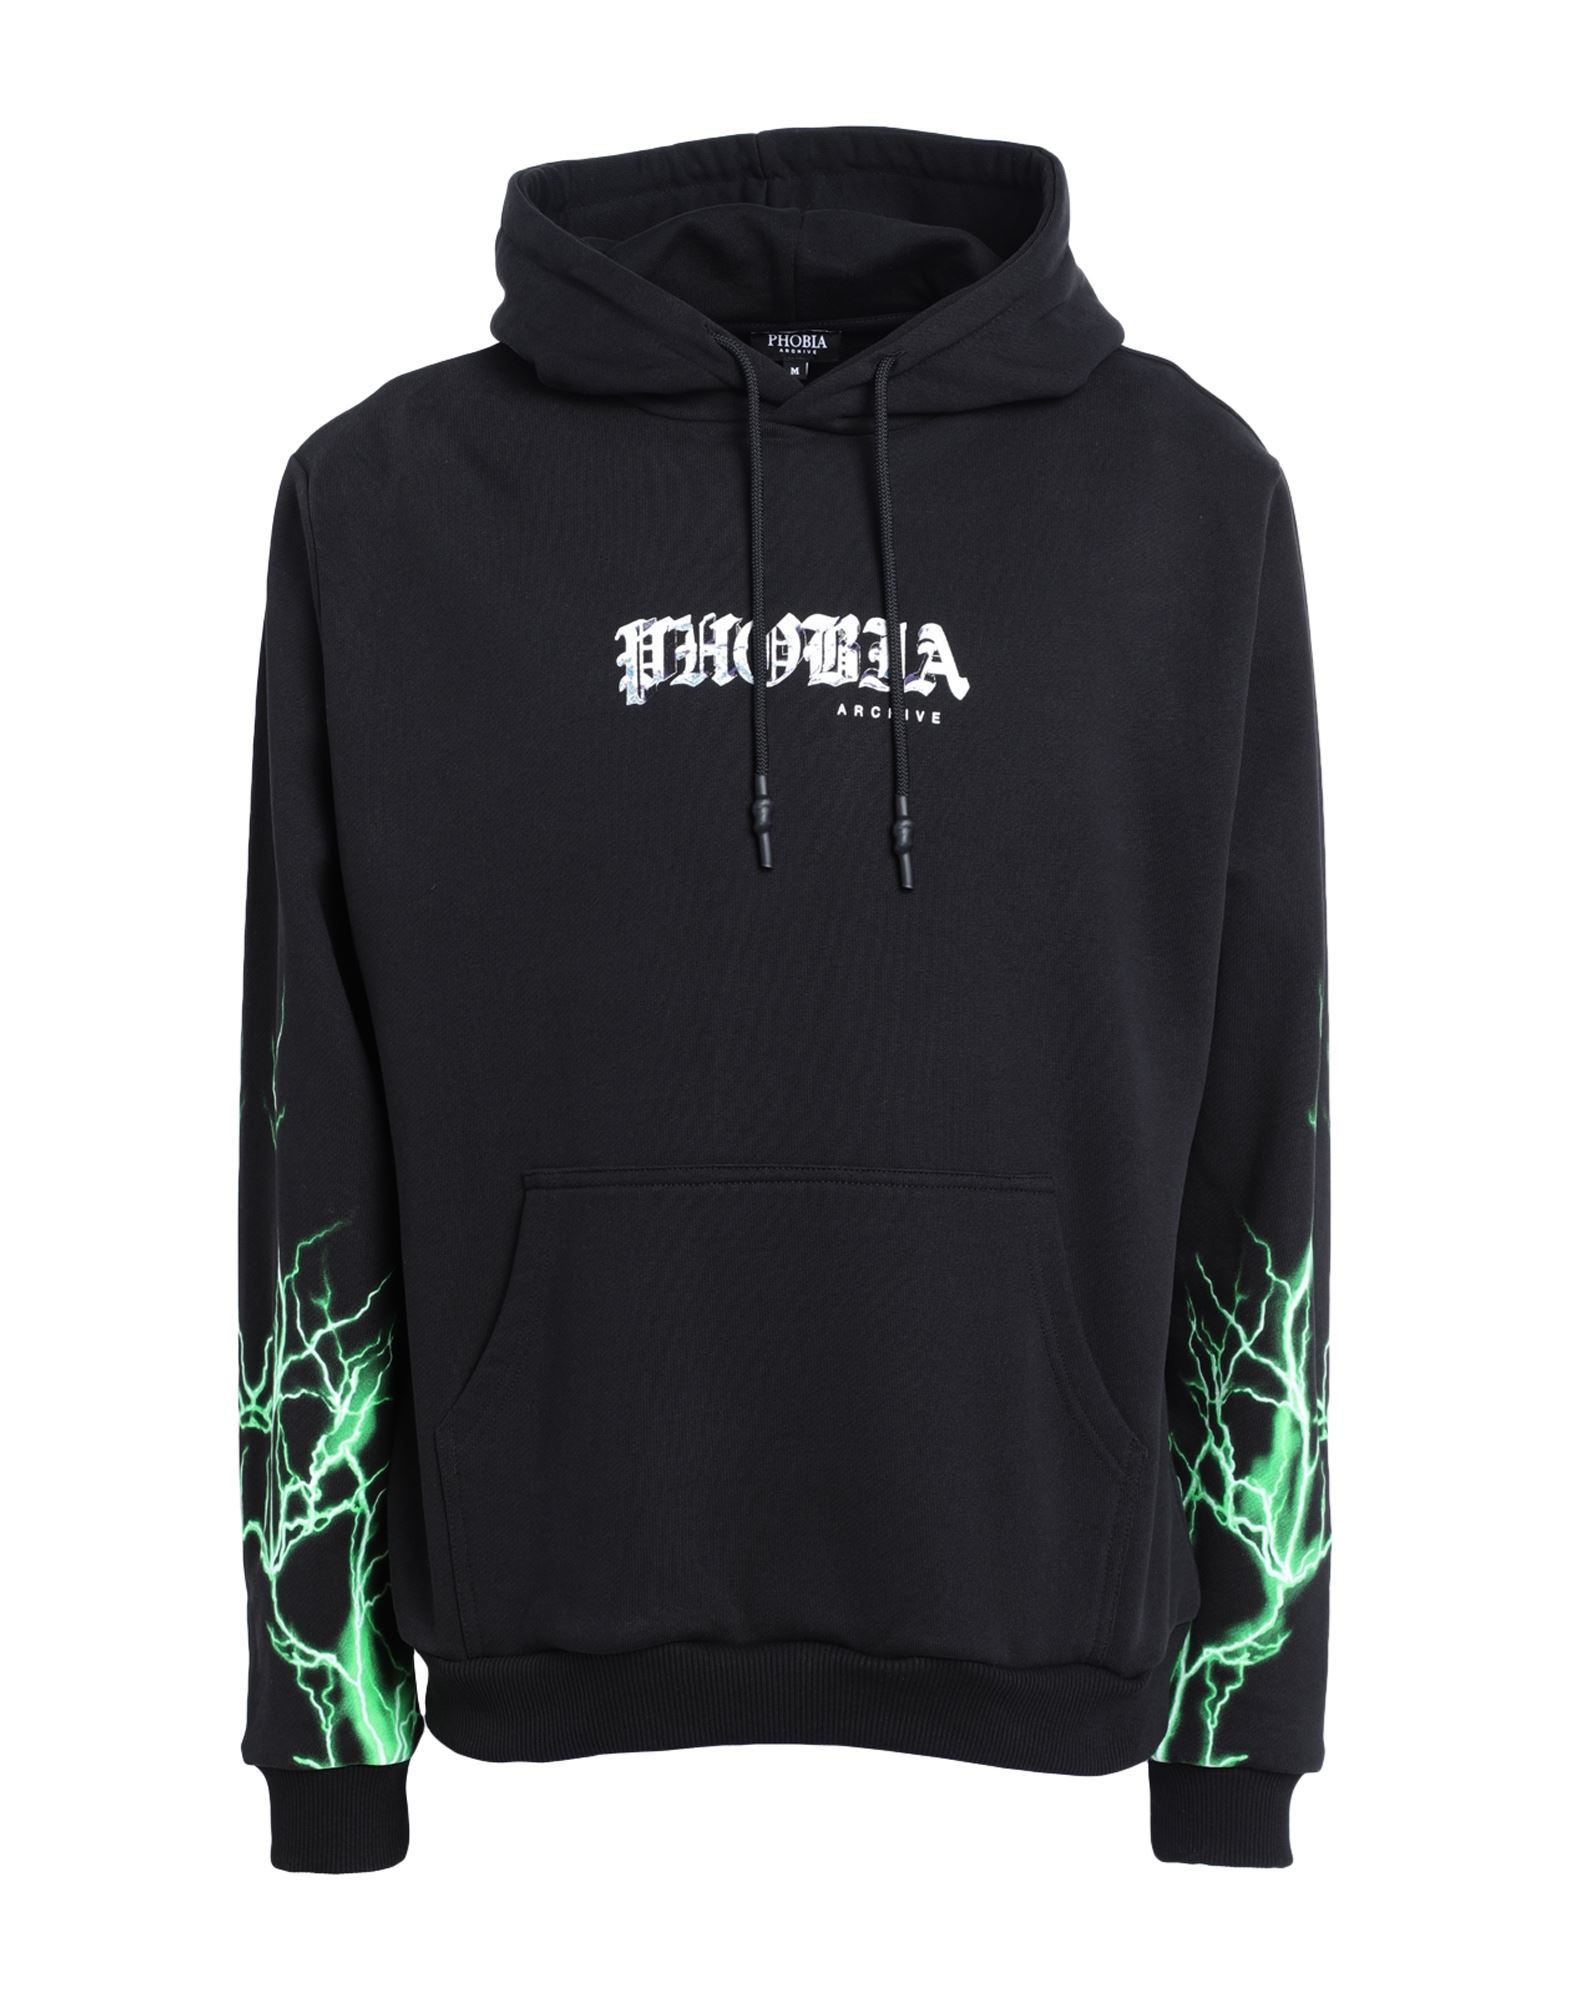 Shop Phobia Archive Hoodie With Green Lightning On Sleeves Man Sweatshirt Black Size Xl Cotton